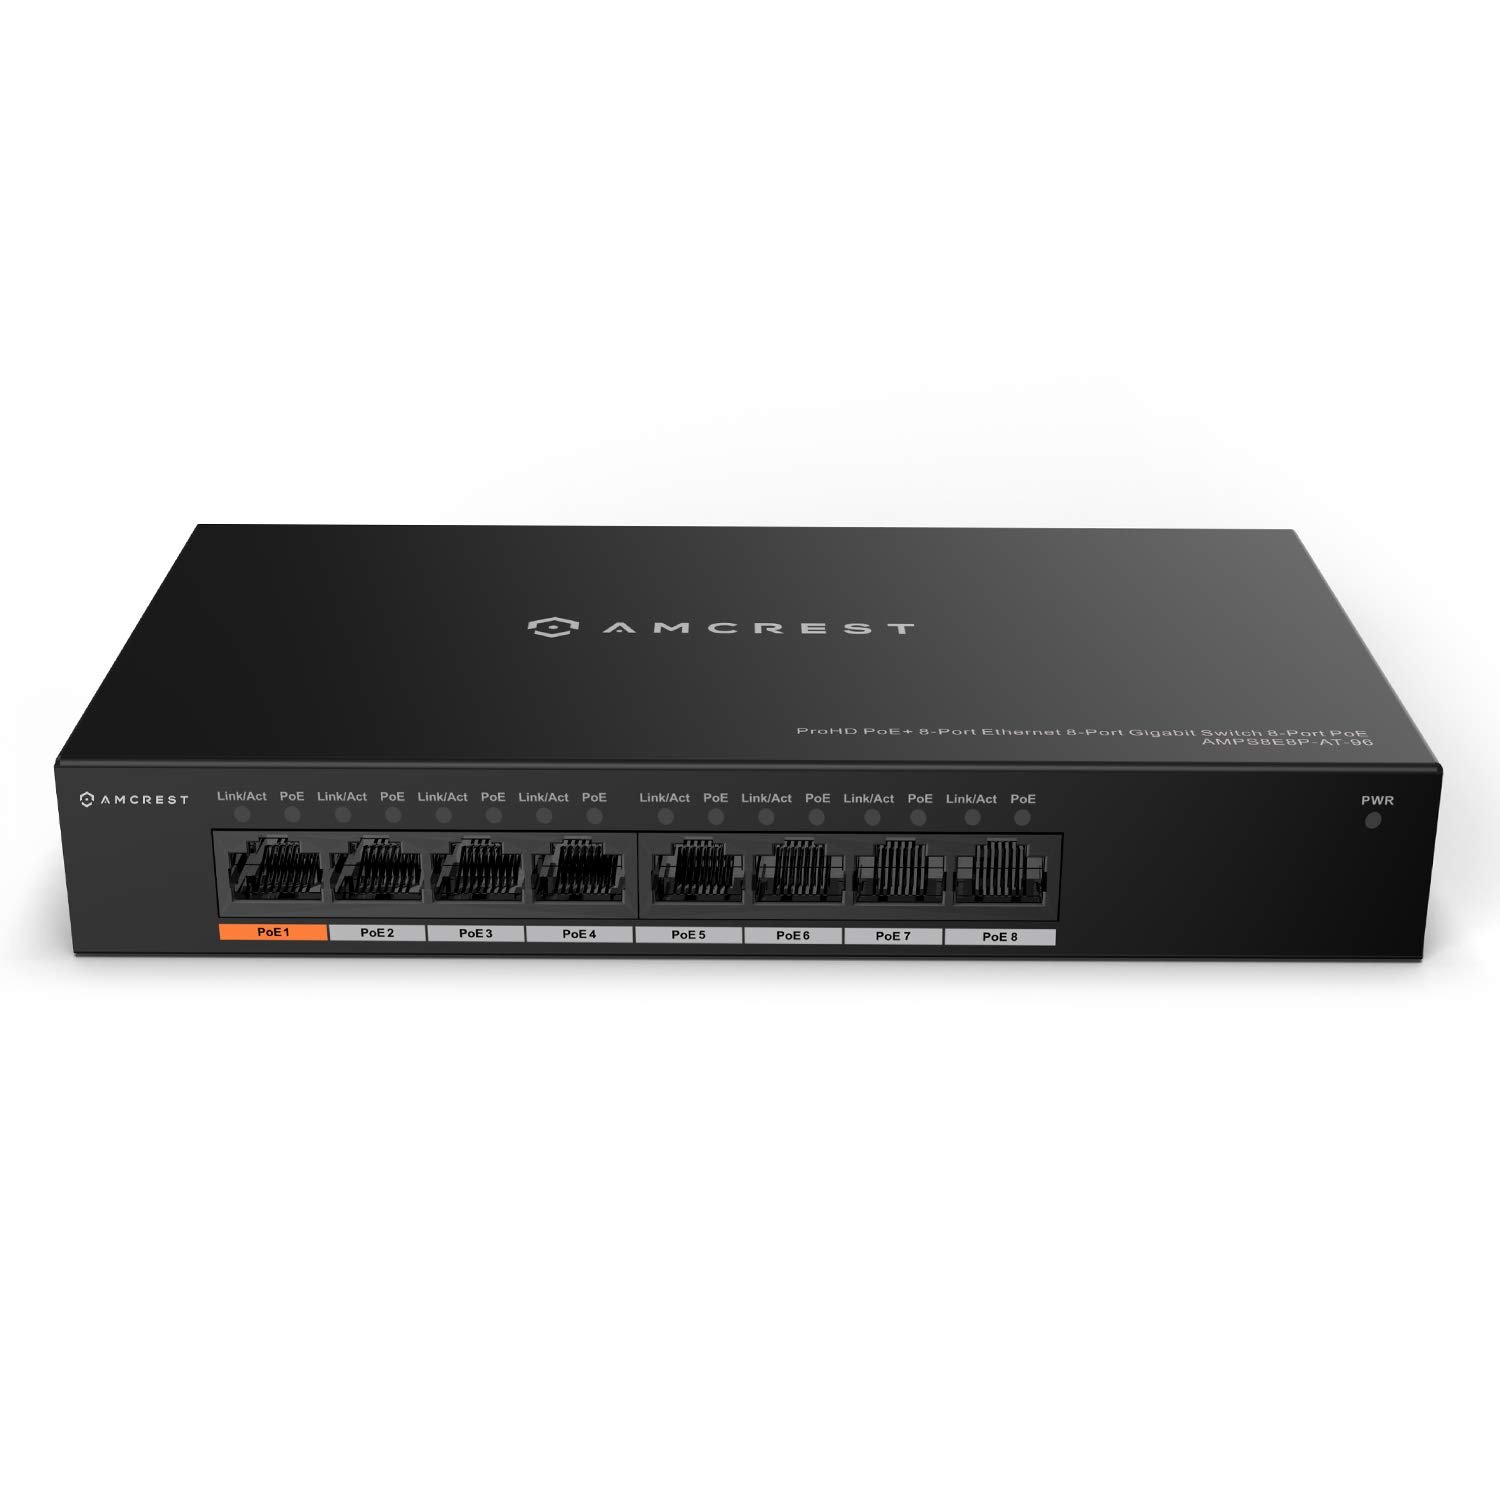 Book Cover Amcrest 8-Port POE+ Power Over Ethernet POE Switch with Metal Housing, 8-Ports POE+ 802.3af/at 96w (AGPS8E8P-AT-96)